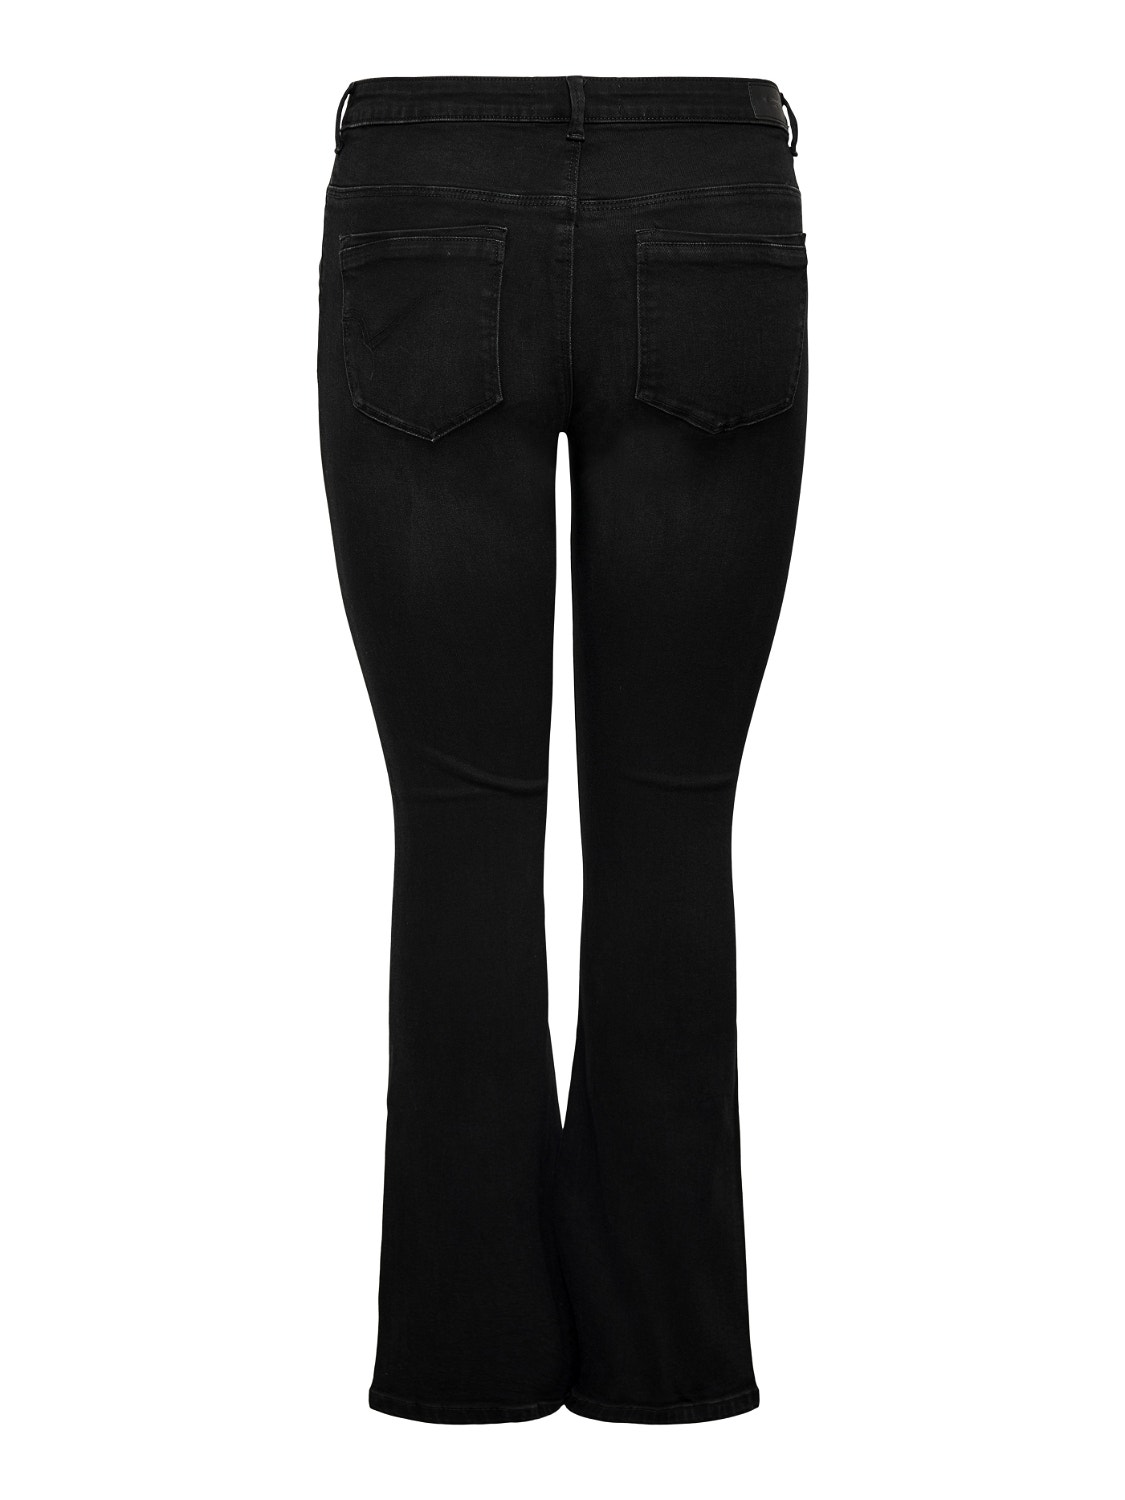 ONLY Curvy CARSally highwaisted Flared Jeans -Black - 15265428